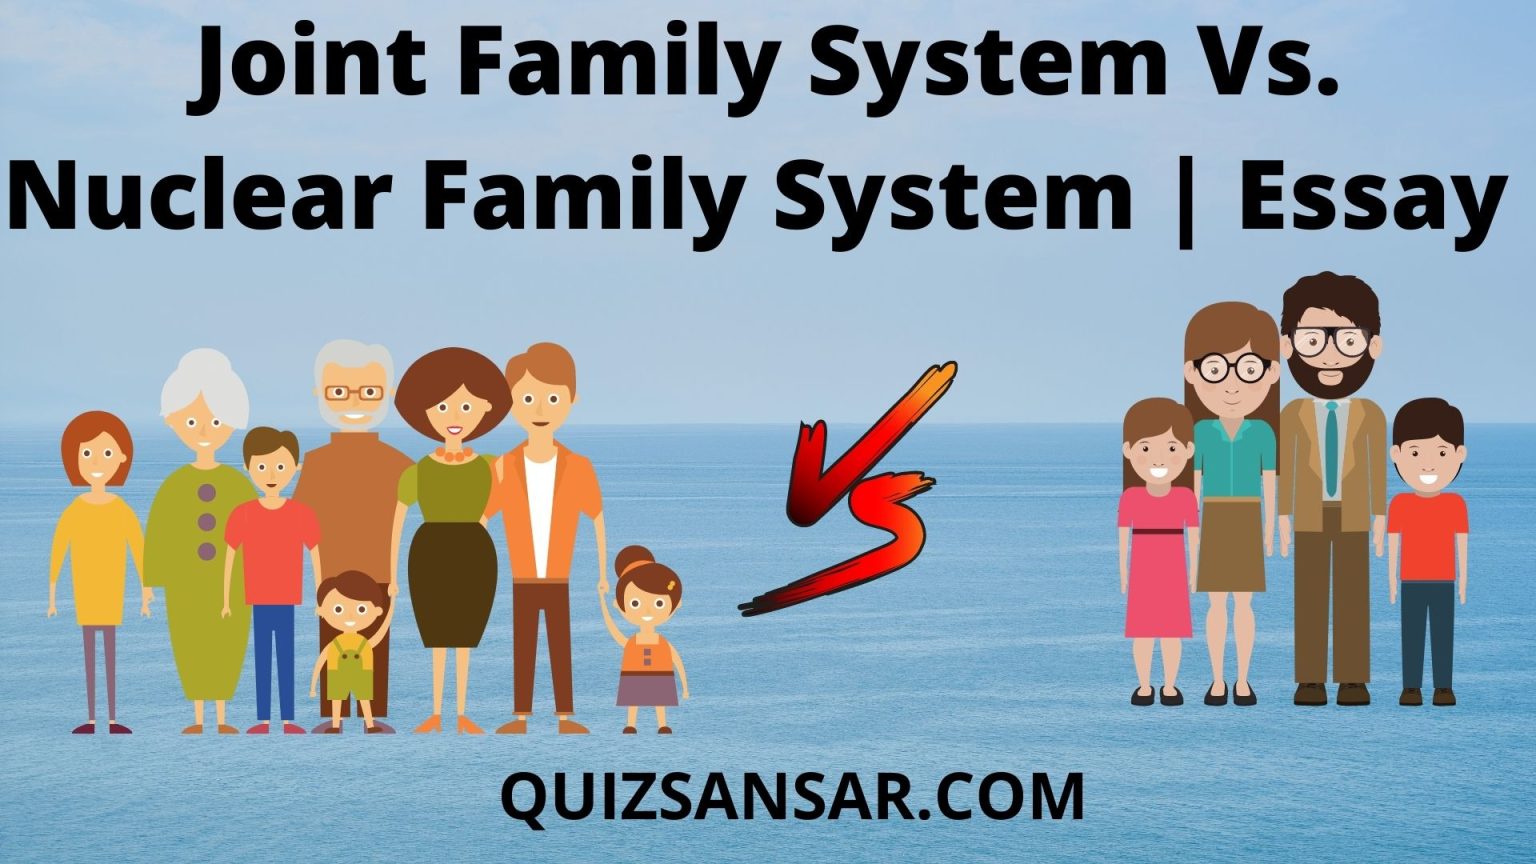 joint family system essay